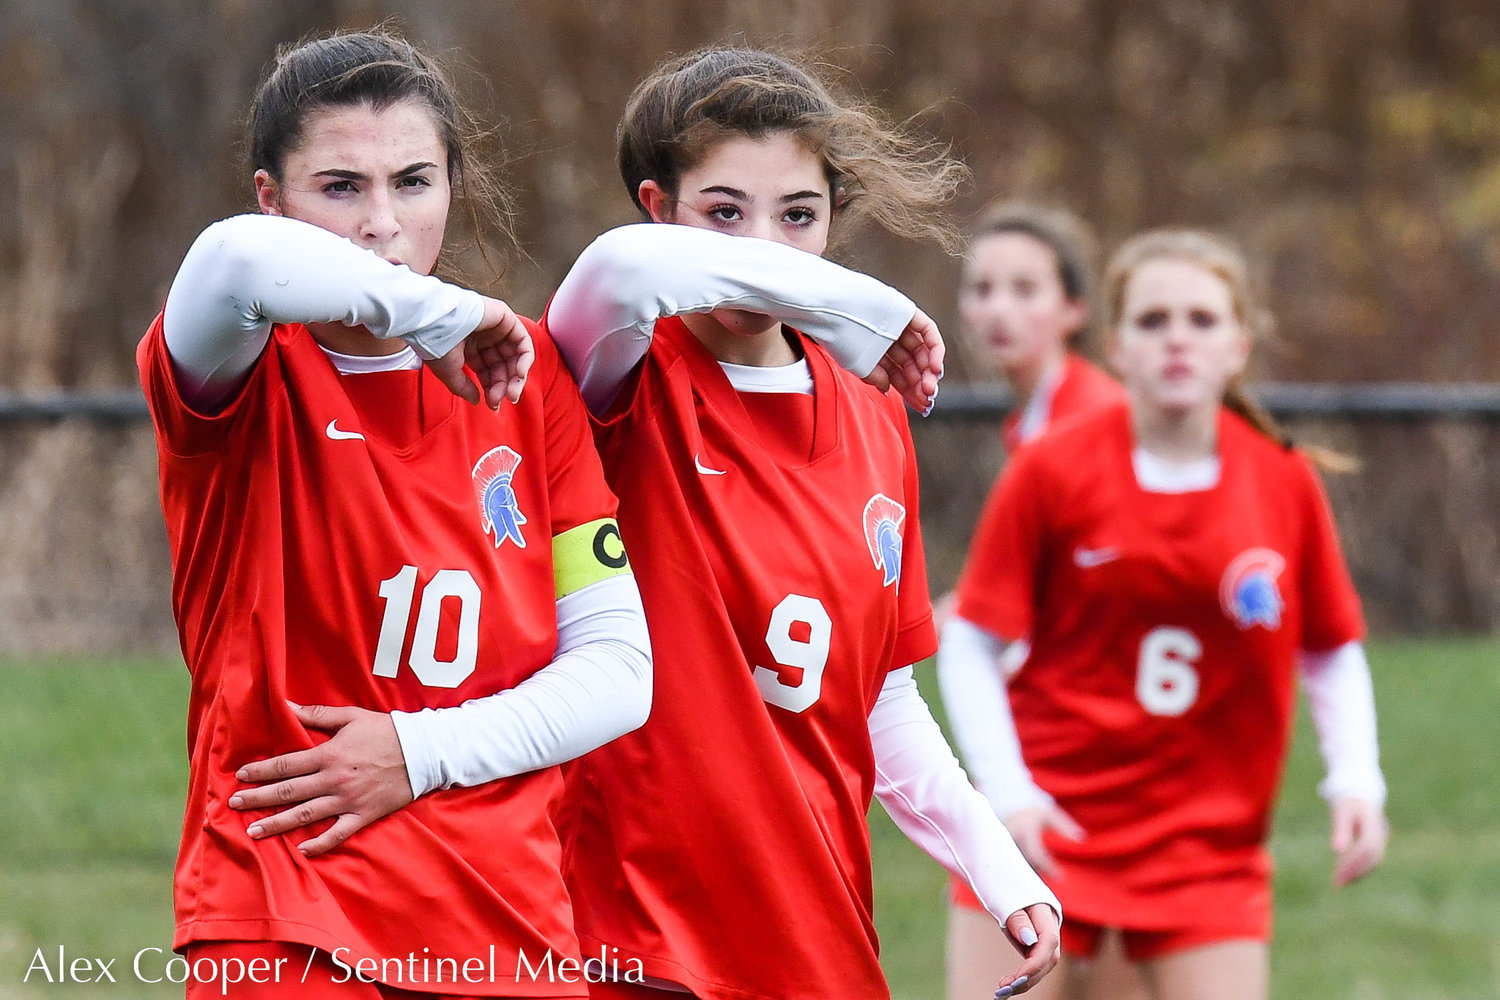 New Hartford players Talia Vitullo (10) and Amanda Graziano (9) protect their face during a corner kick at the Class A state final on Sunday at Tompkins-Cortland Community College. The Spartans lost 3-1.